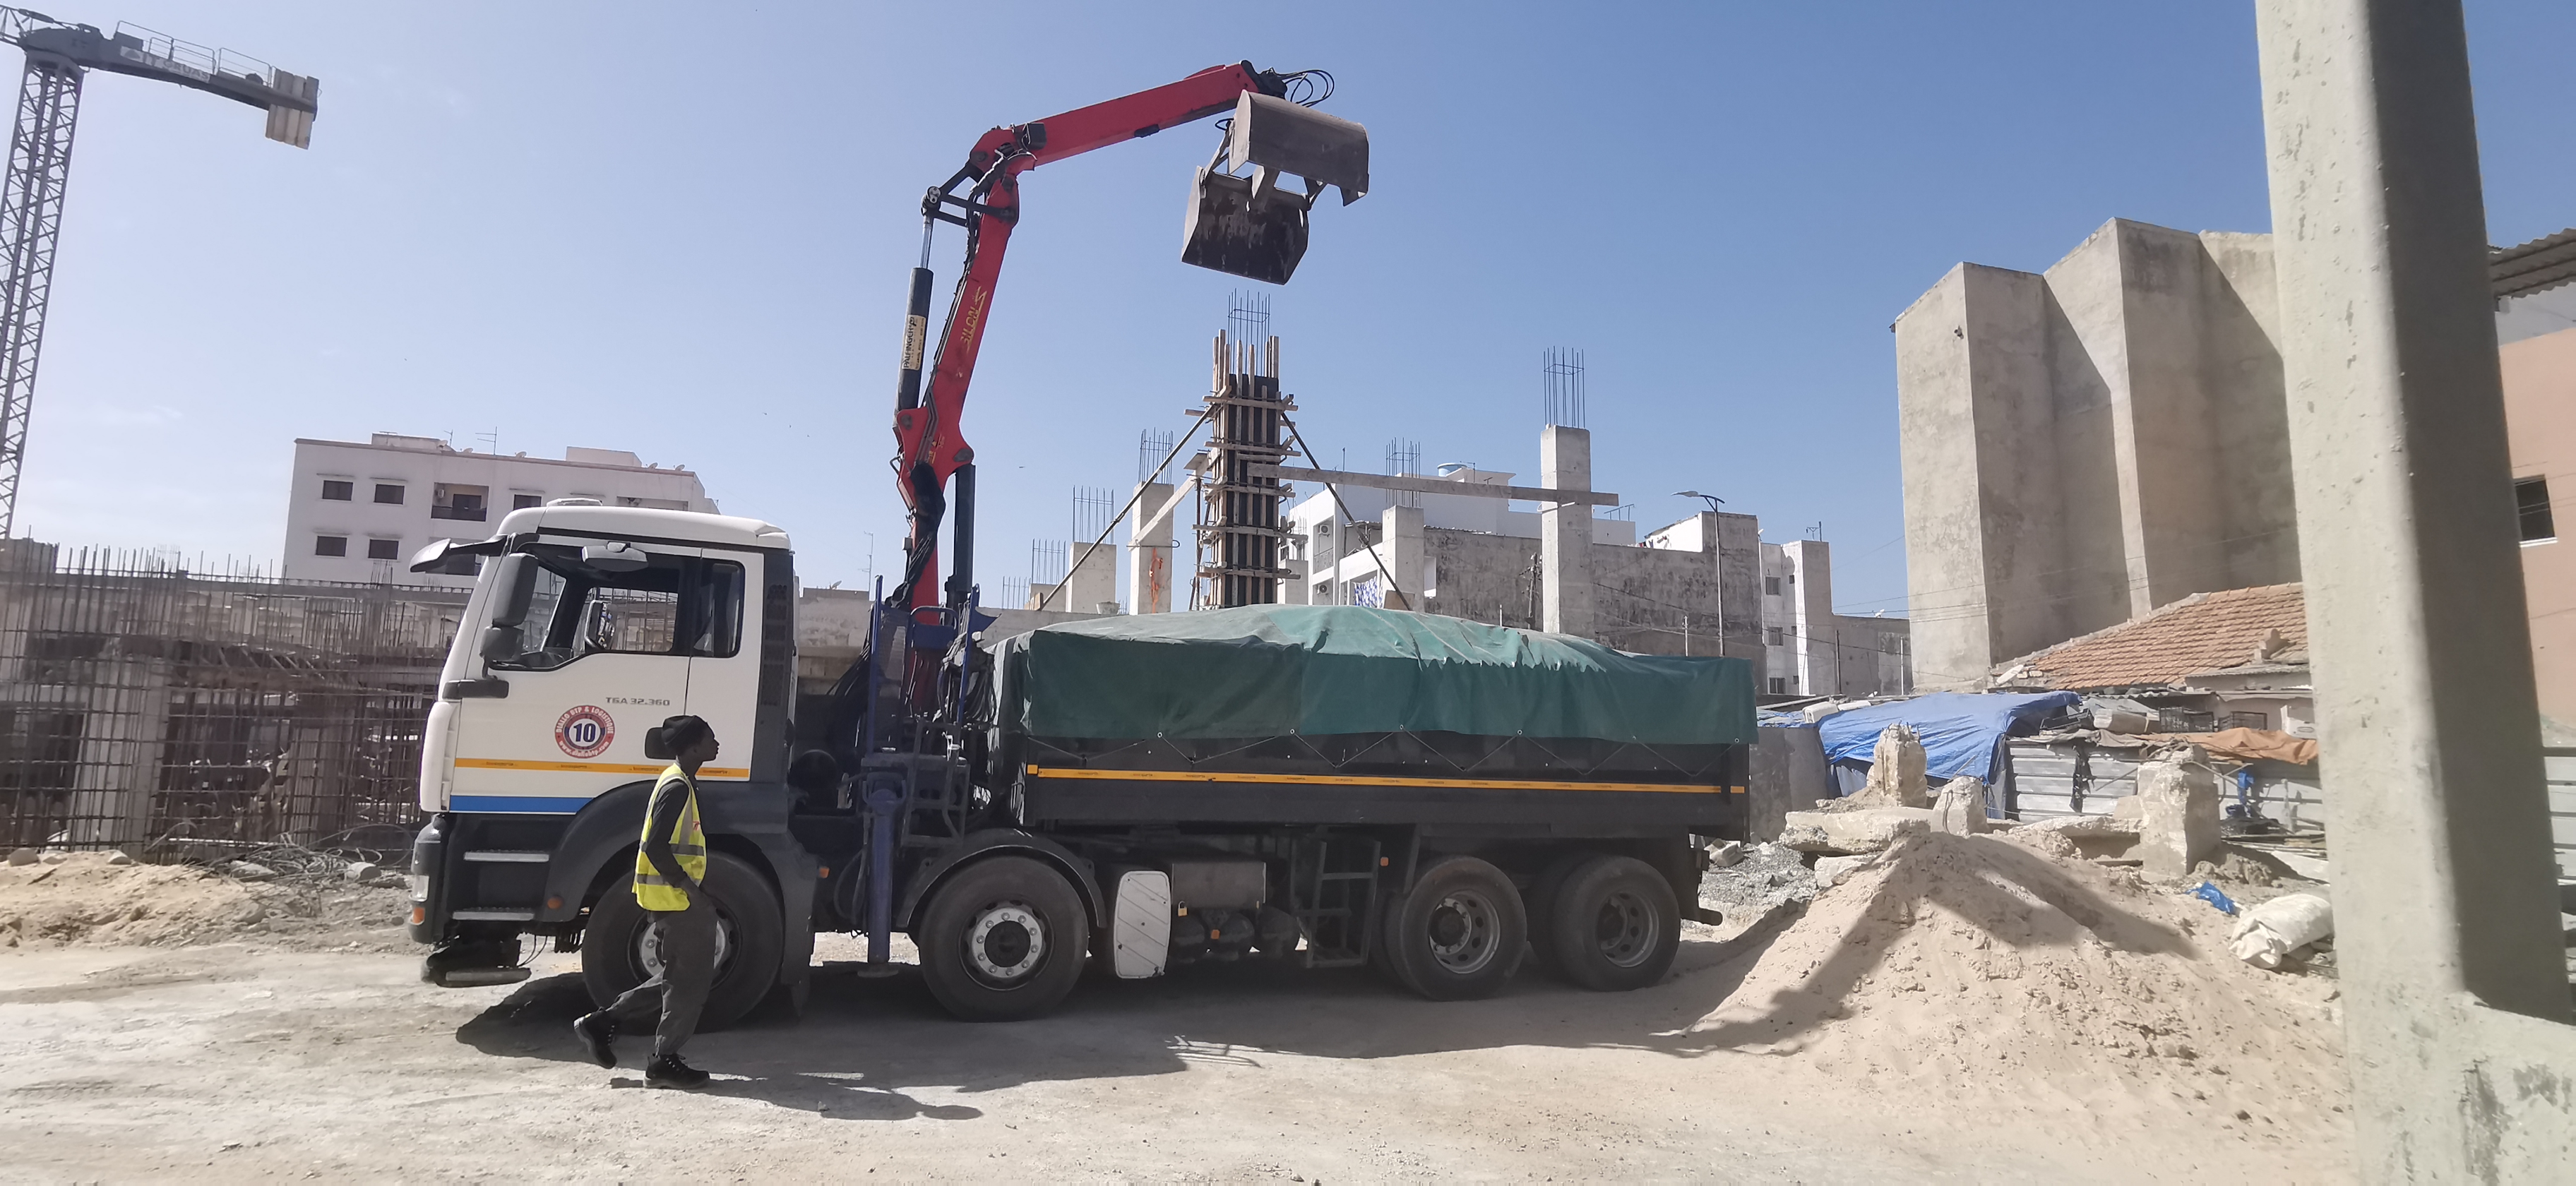 Hire a Truck Crane 8x4 in Senegal: rubble removal, sale of building materials and much more!